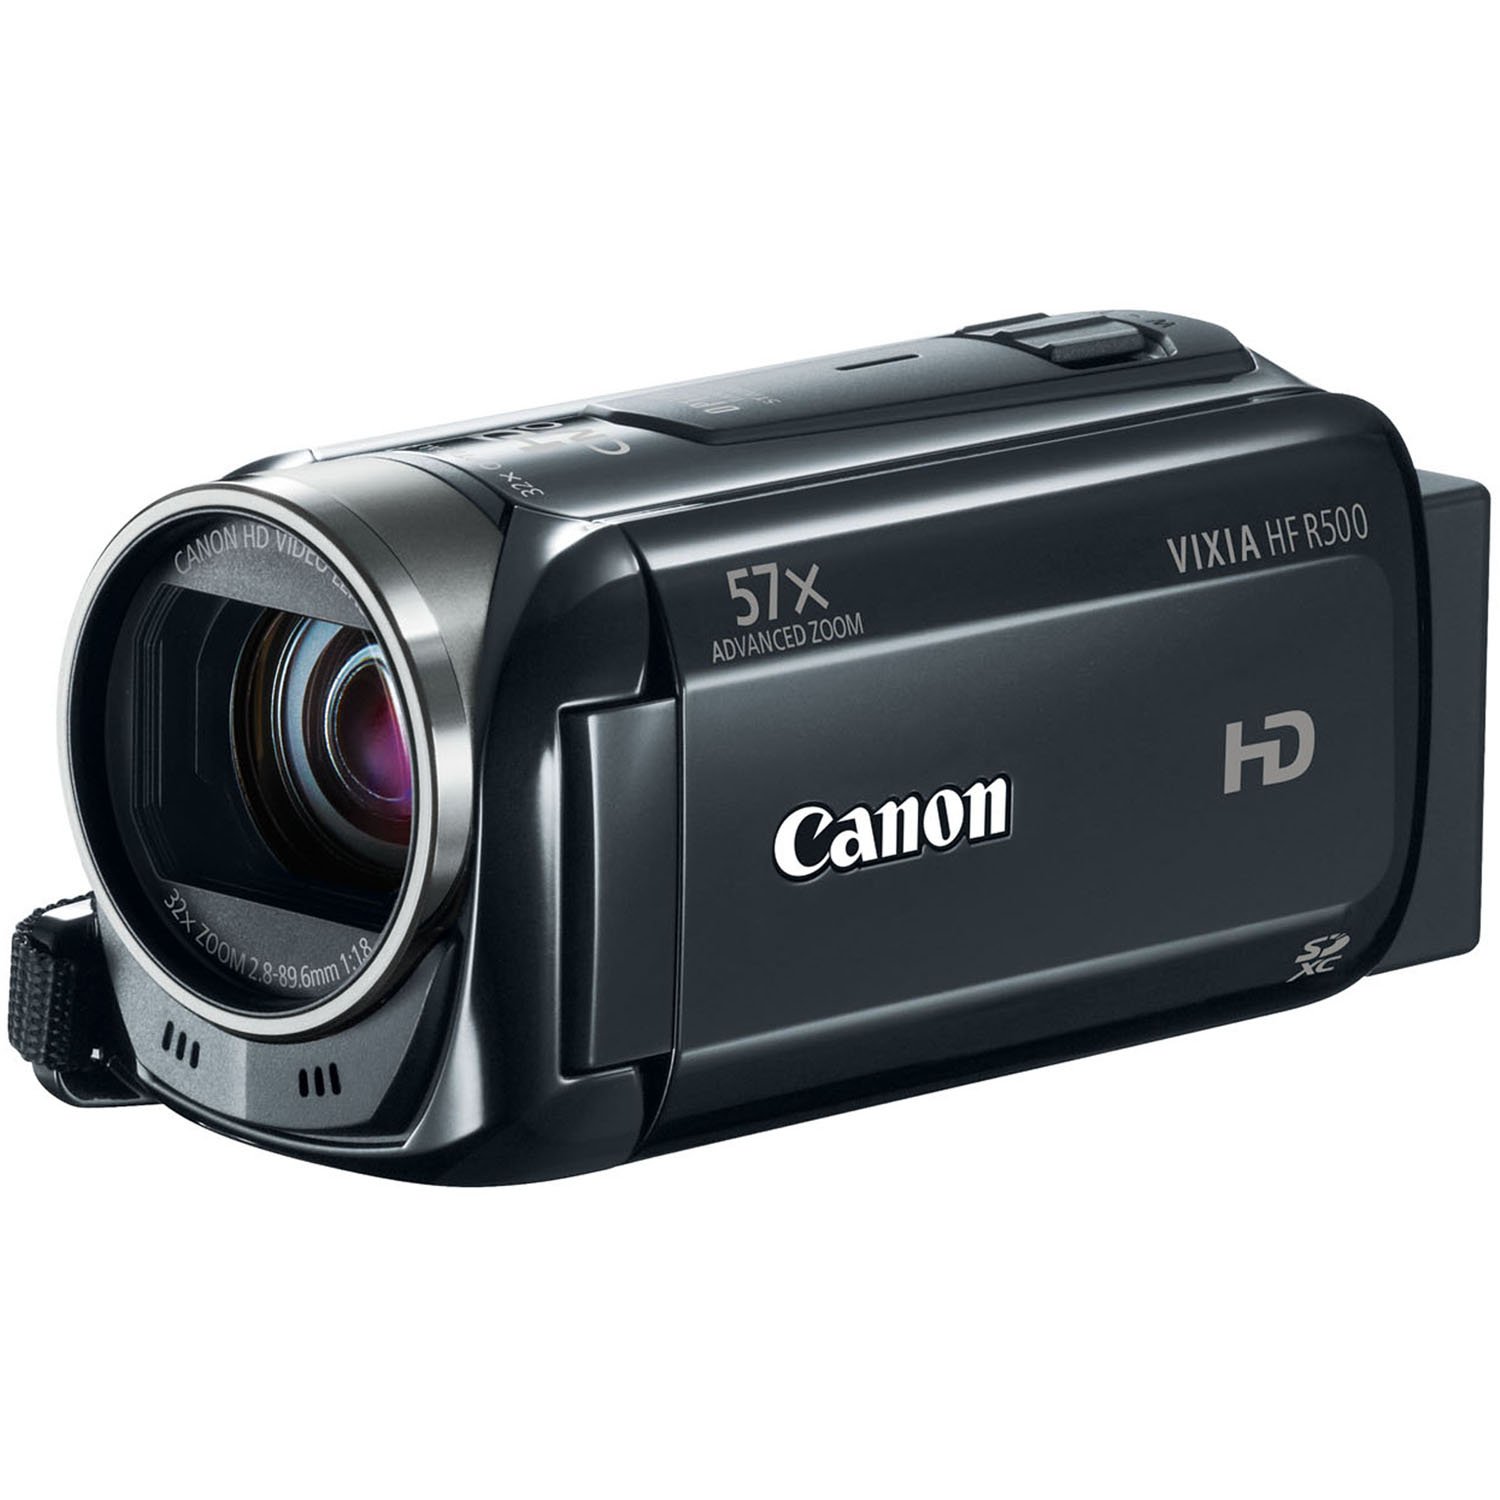 Canon VIXIA HF R500 Digital Camcorder (Black) (Discontinued by Manufacturer)